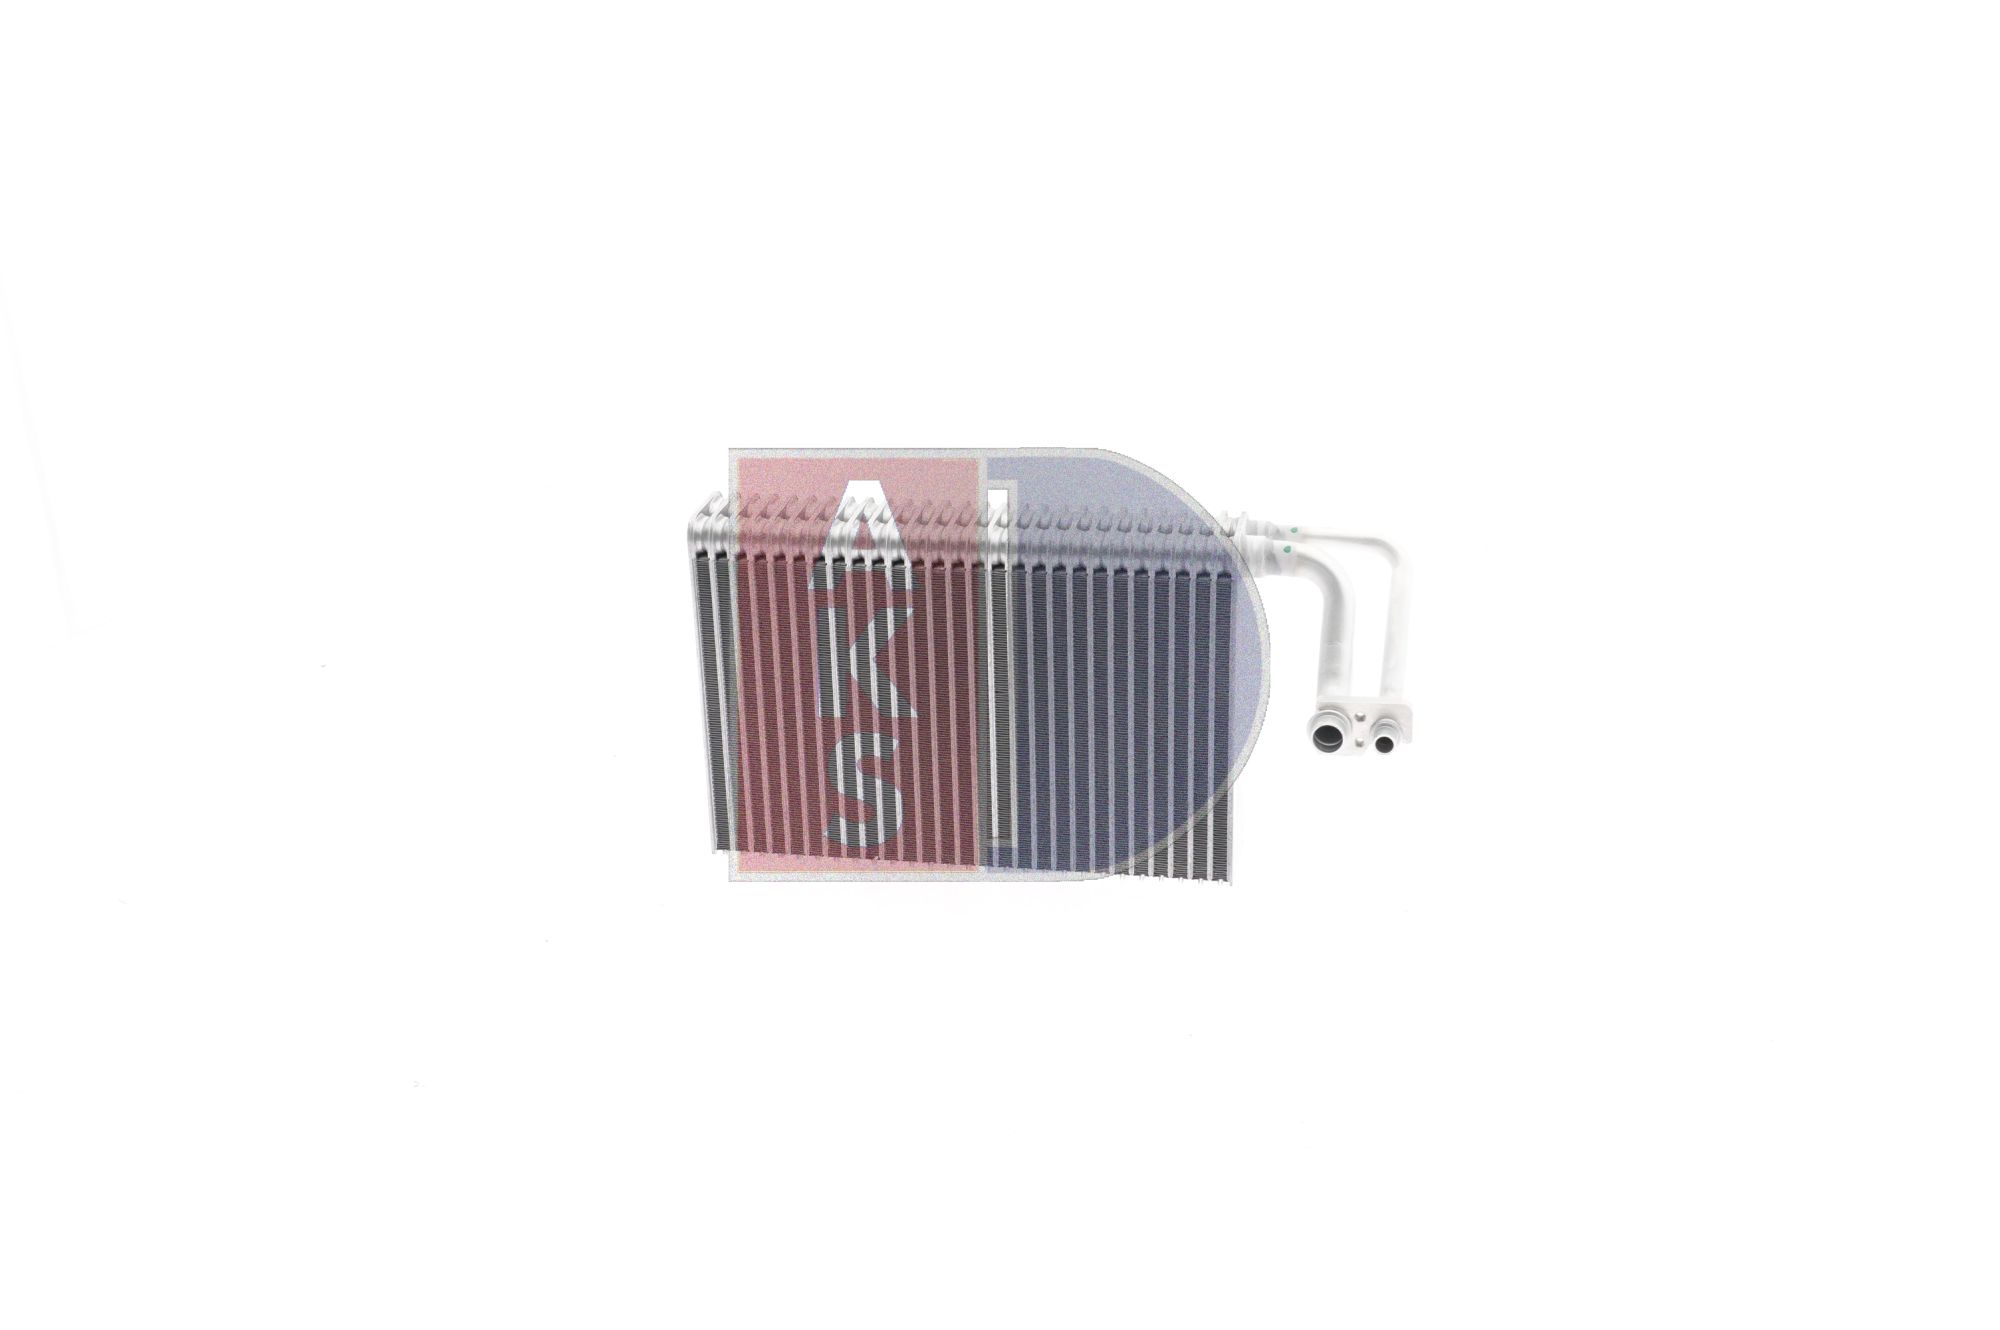 AKS DASIS 820102N Air conditioning evaporator without expansion valve